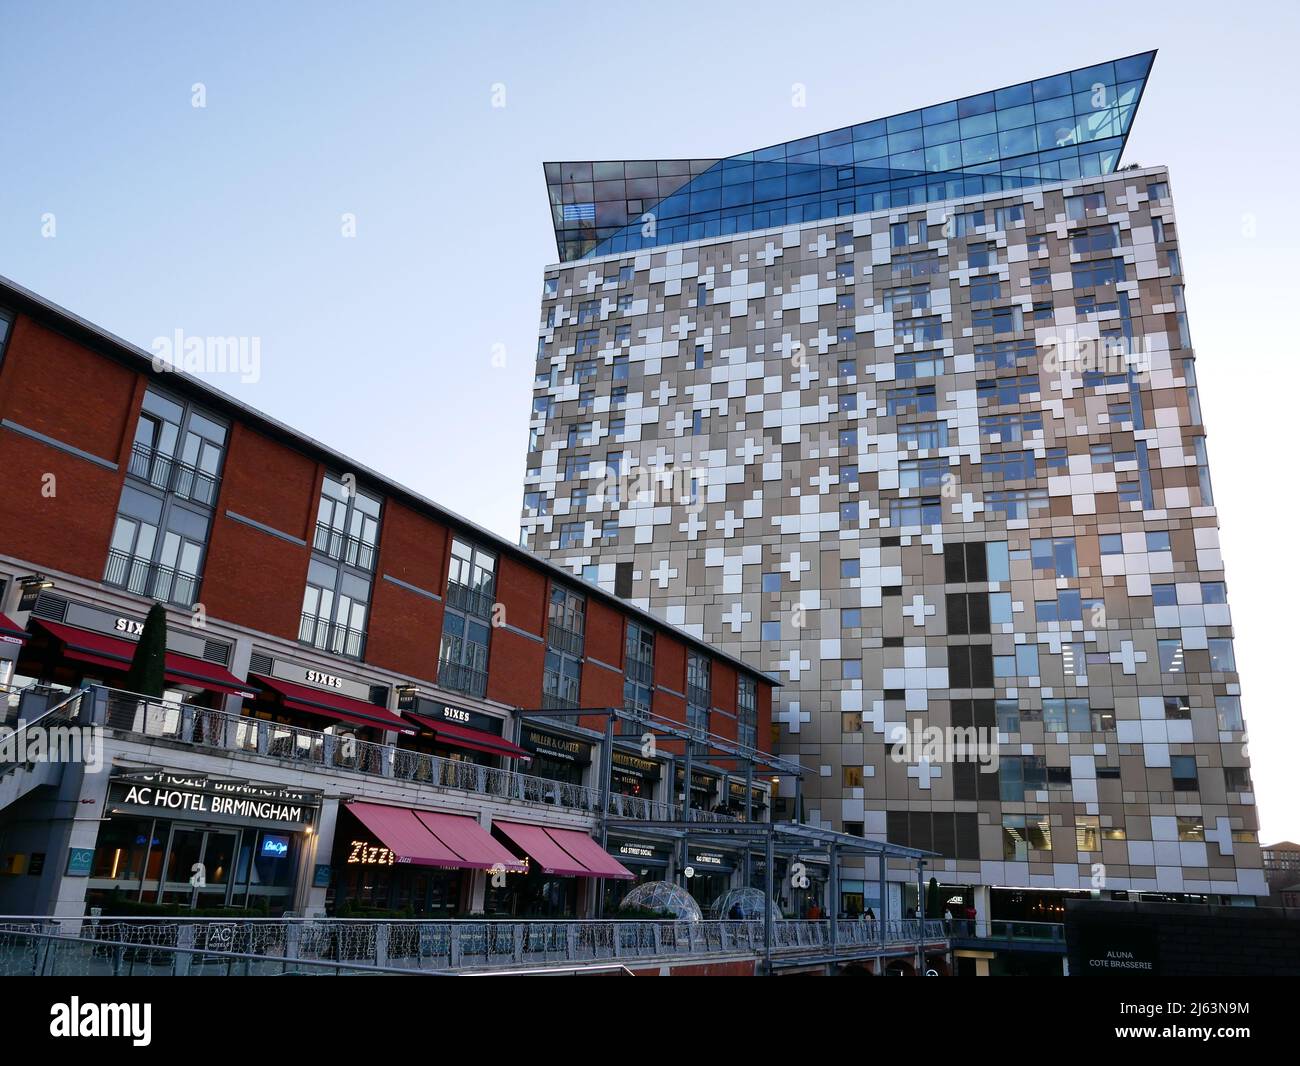 The Cube, Birmingham. More than just offices the landmark building houses a hotel, apartments, a bowling alley and the UK’s largest automated car park. Stock Photo